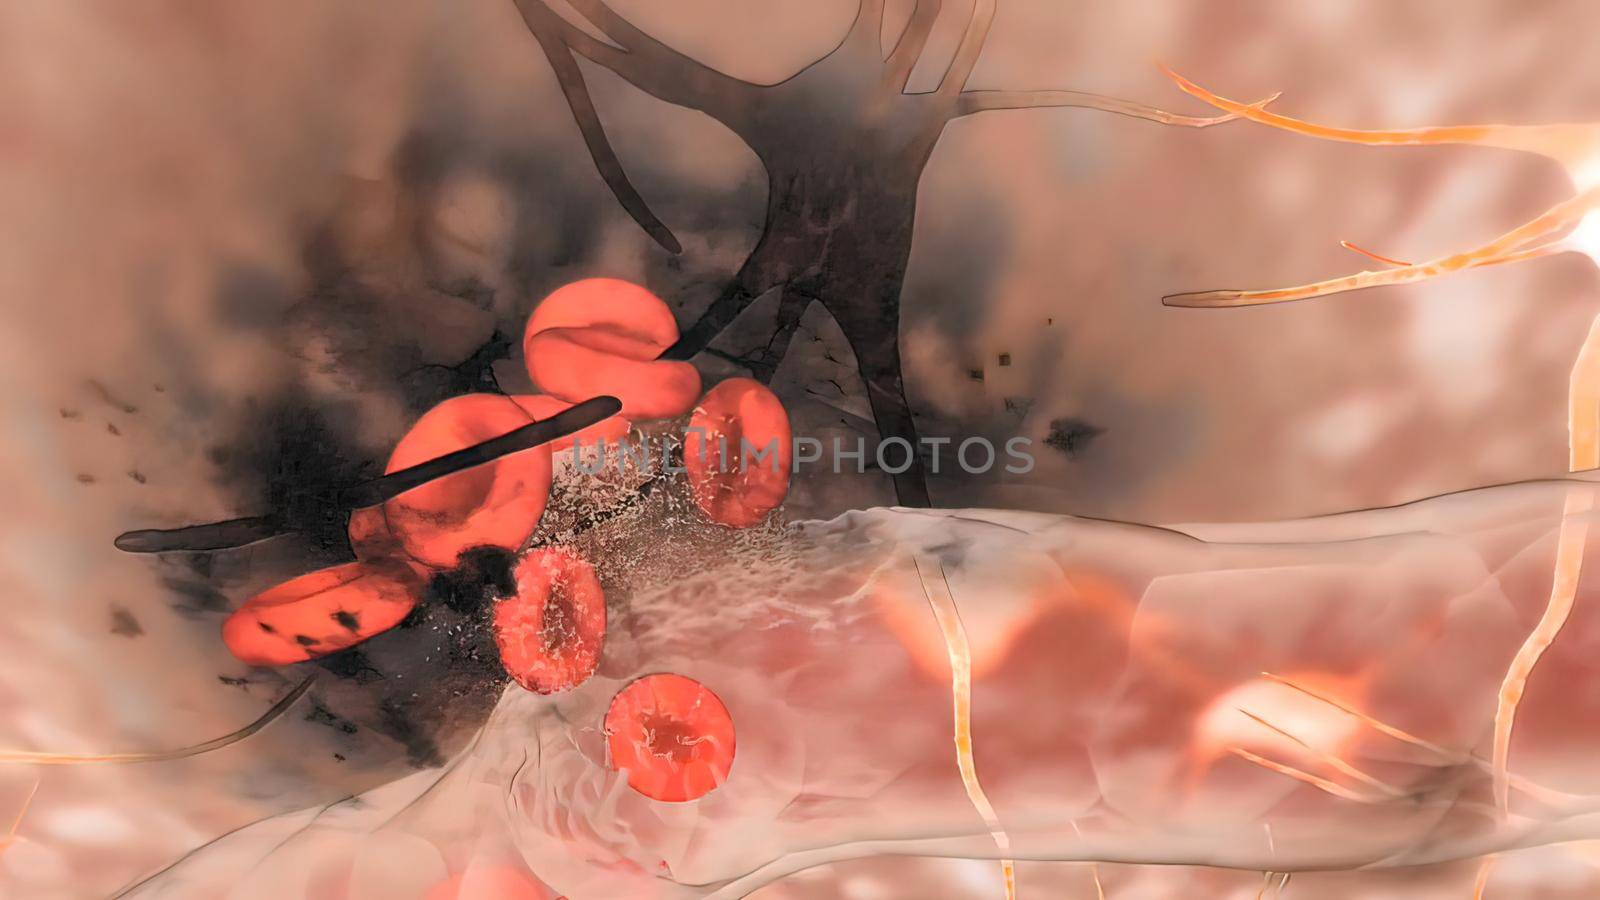 Cerebral hemorrhage as a result of an aneurysm bursting in the brain by creativepic